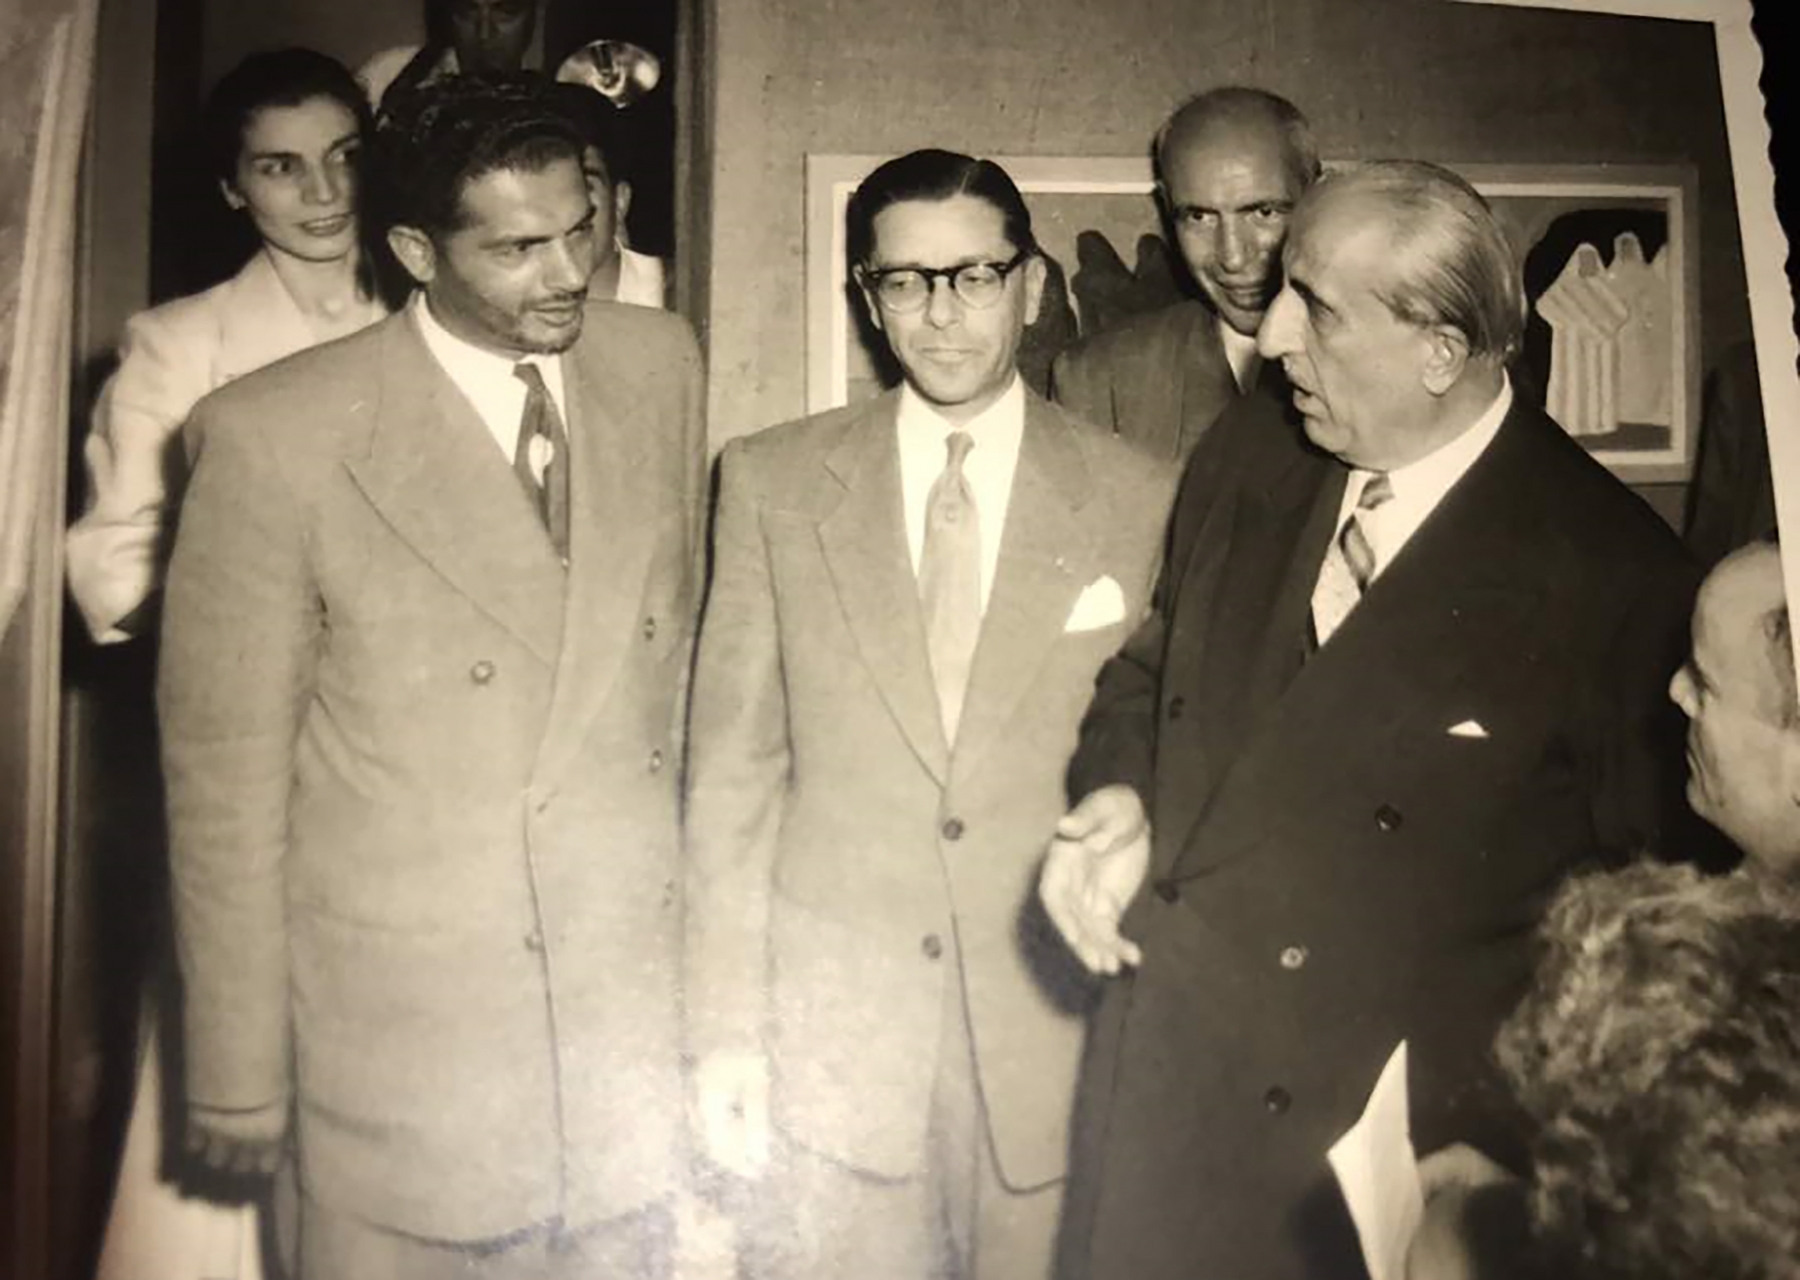 An exhibition opening for Association of Syrian Artists in 1950s.&nbsp;Syrian president Shukri Al-Quwatli with artist Anwar Ali Arnaout (left), artist Jack Wardeh (right corner). Archive of artist Anwar Ali Arnaout.